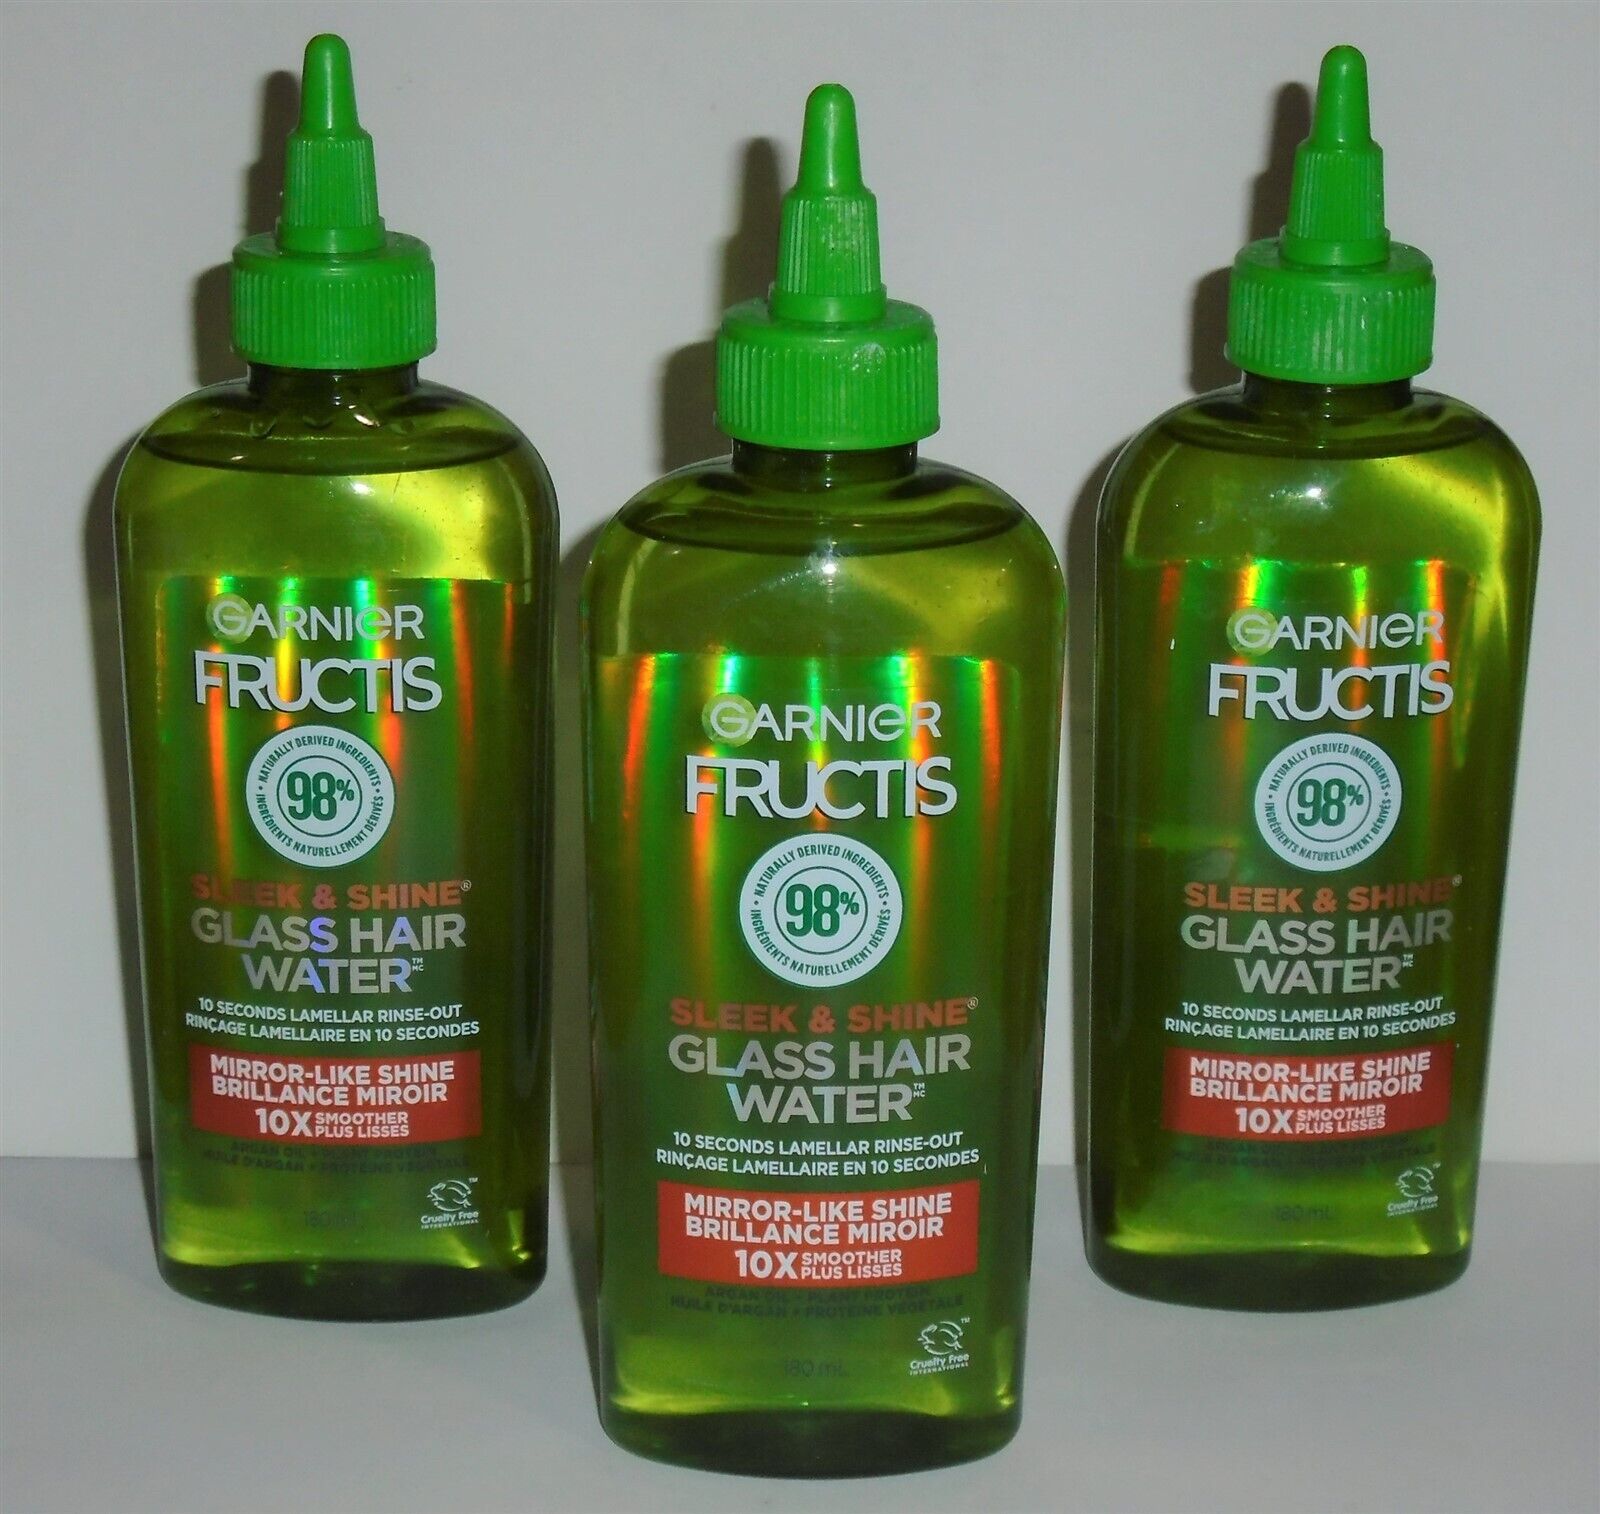 Garnier Glass Hair Water: How To Use